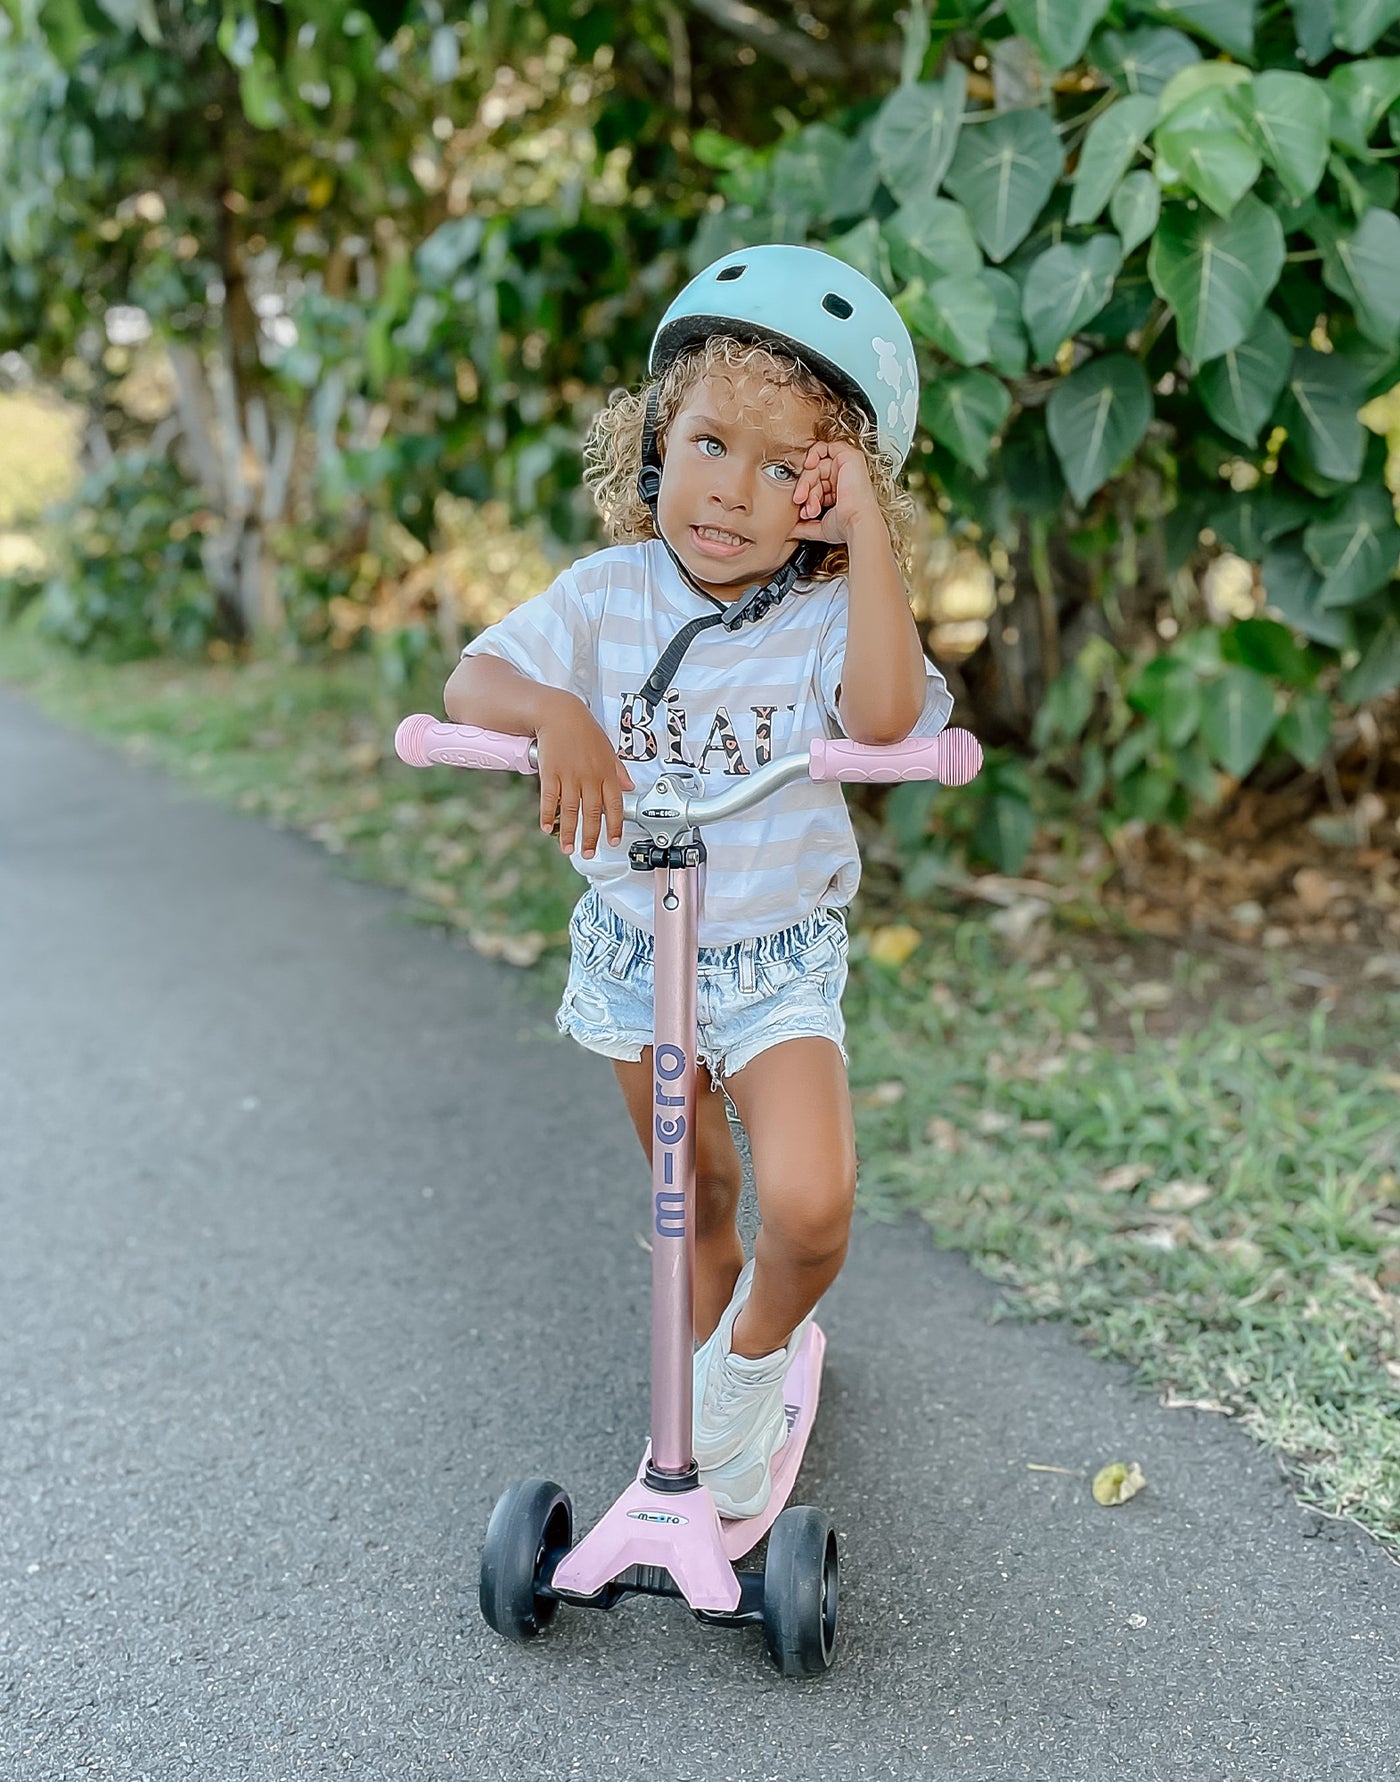 kid on their maxi deluxe pro rose pink scooter